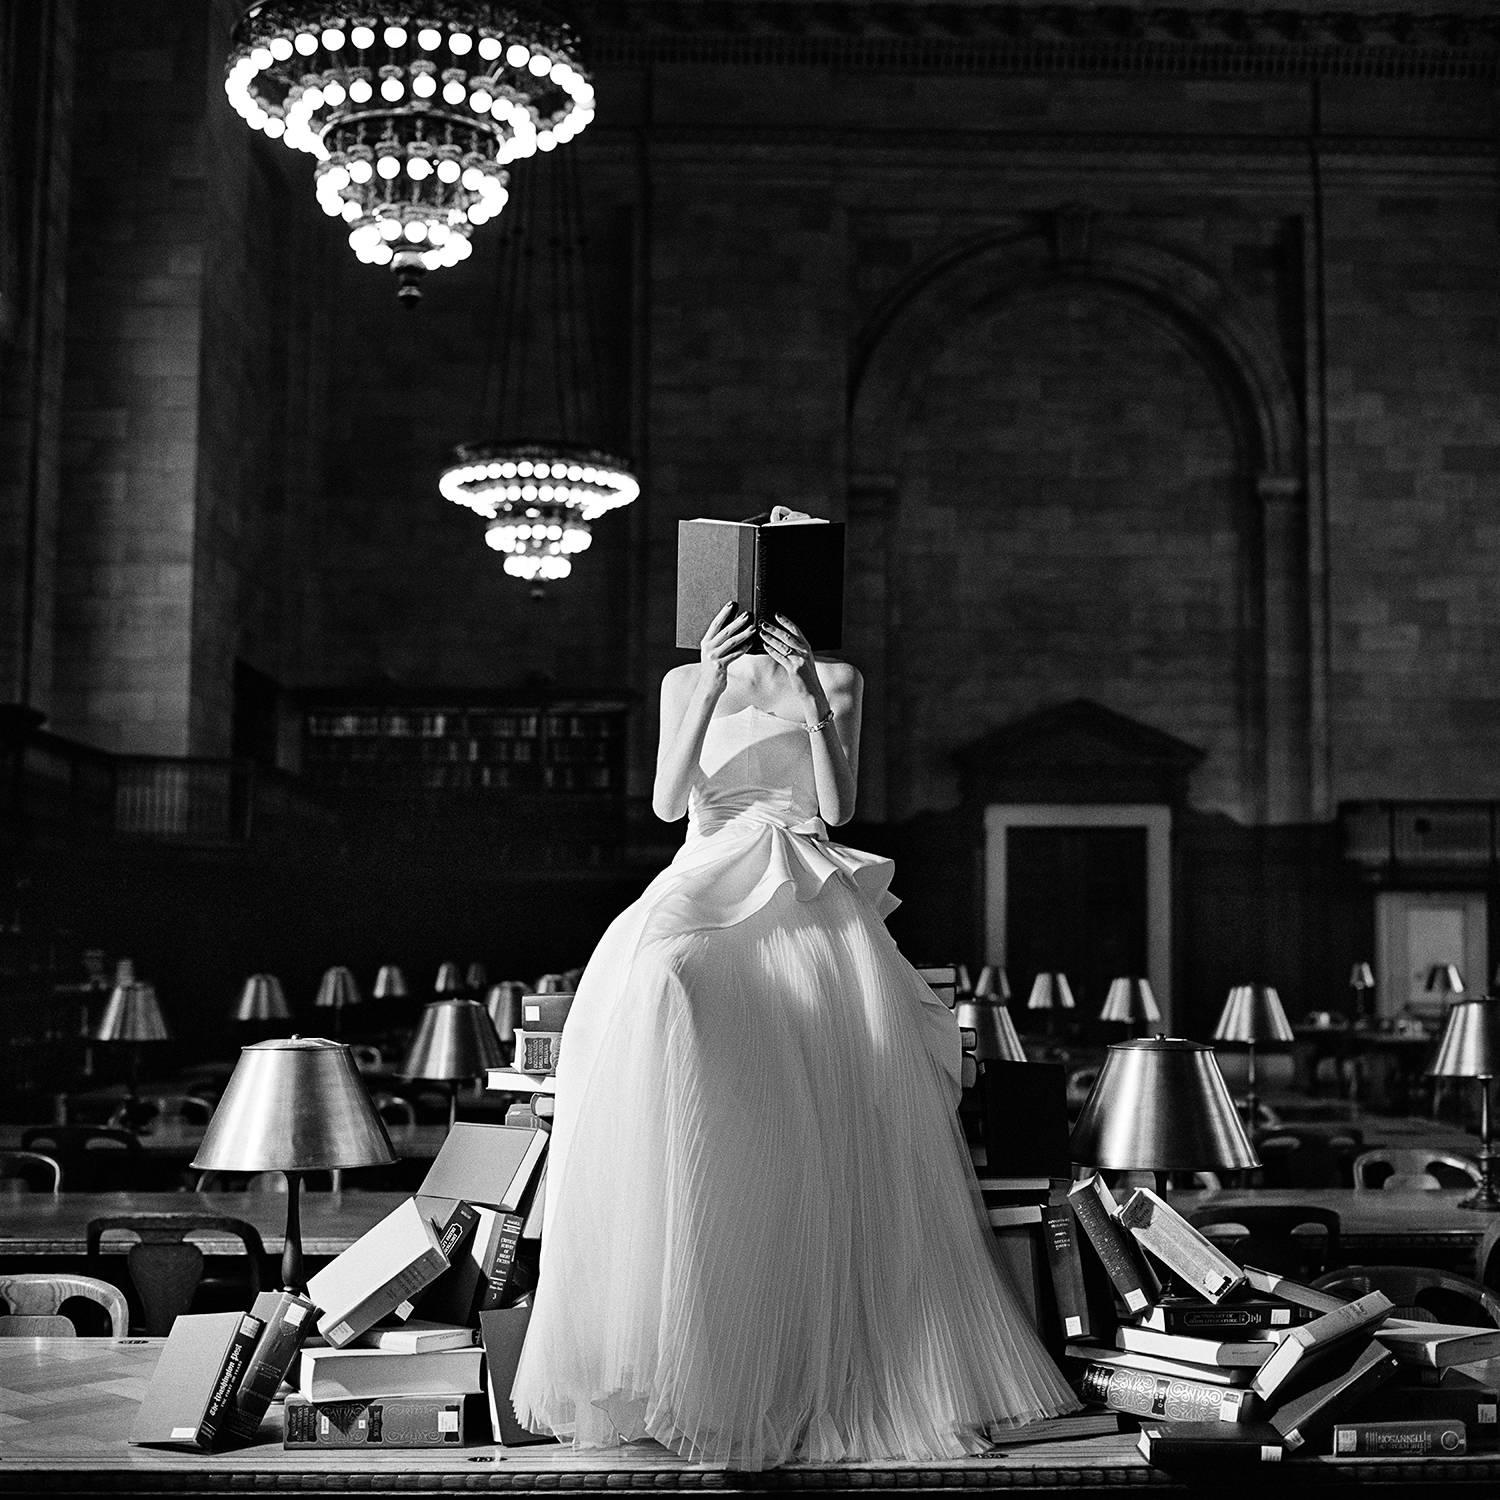 Flynn Reading on a Pile of Books- black and white estate print from Rodney Smith